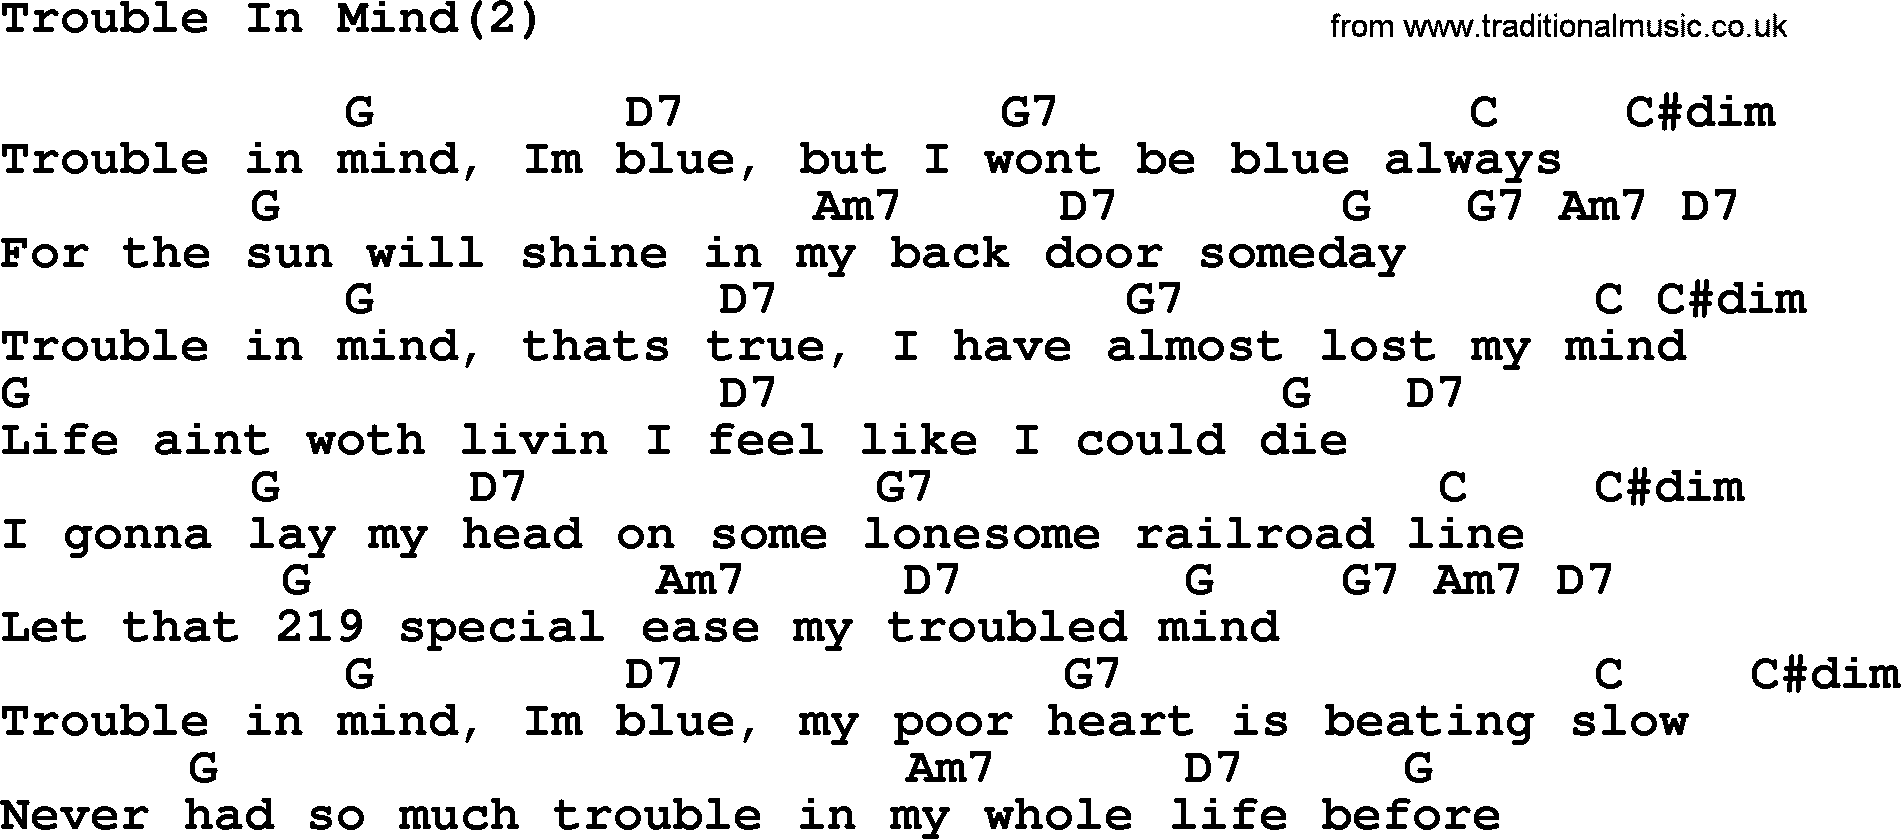 Johnny Cash song Trouble In Mind(2), lyrics and chords